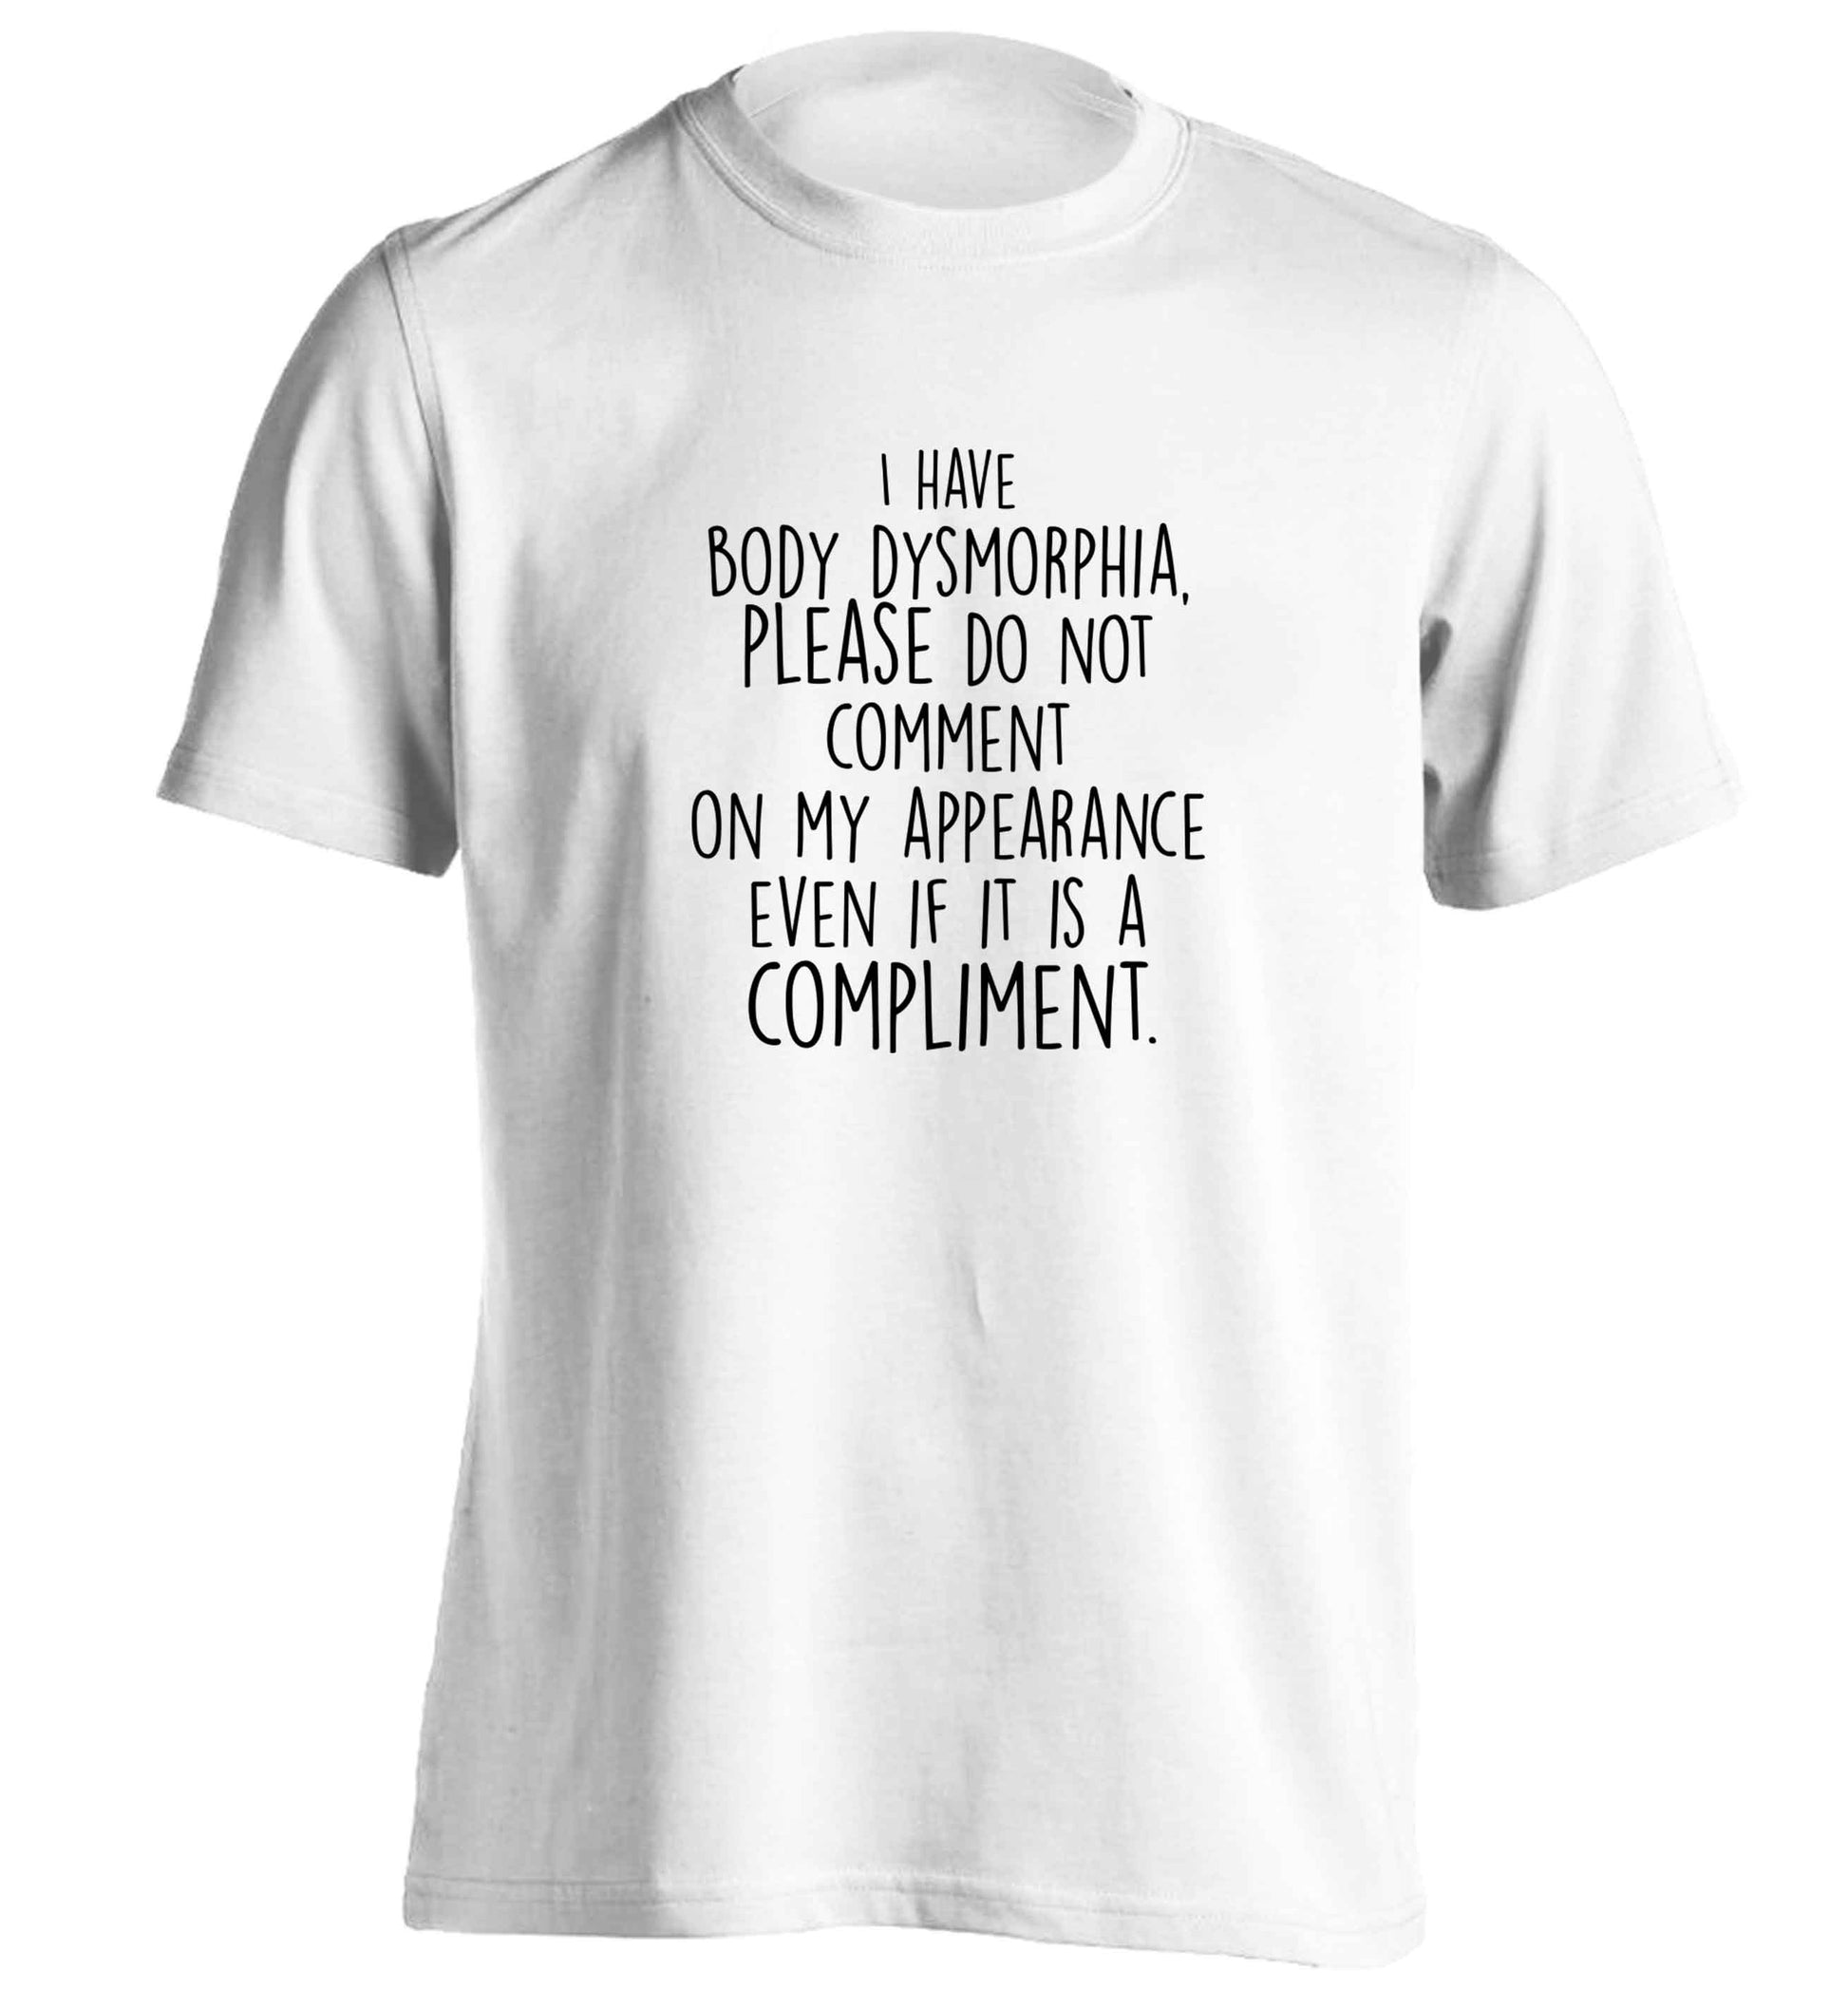 I have body dysmorphia, please do not comment on my appearance even if it is a compliment adults unisex white Tshirt 2XL